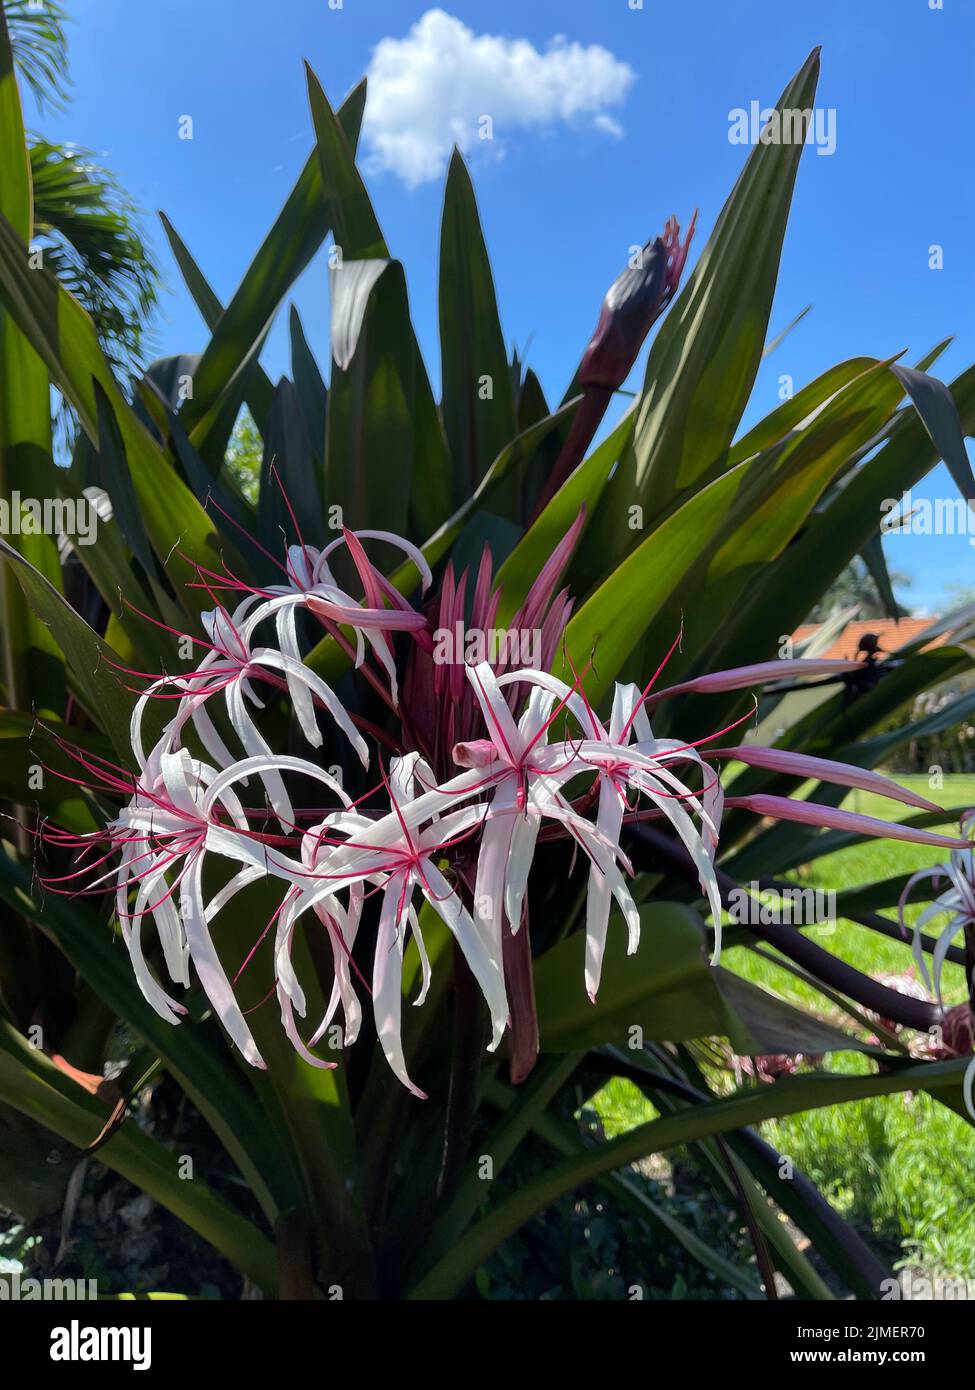 The vertical close-up view of a Crinum asiaticum flower plant under the blue sky Stock Photo